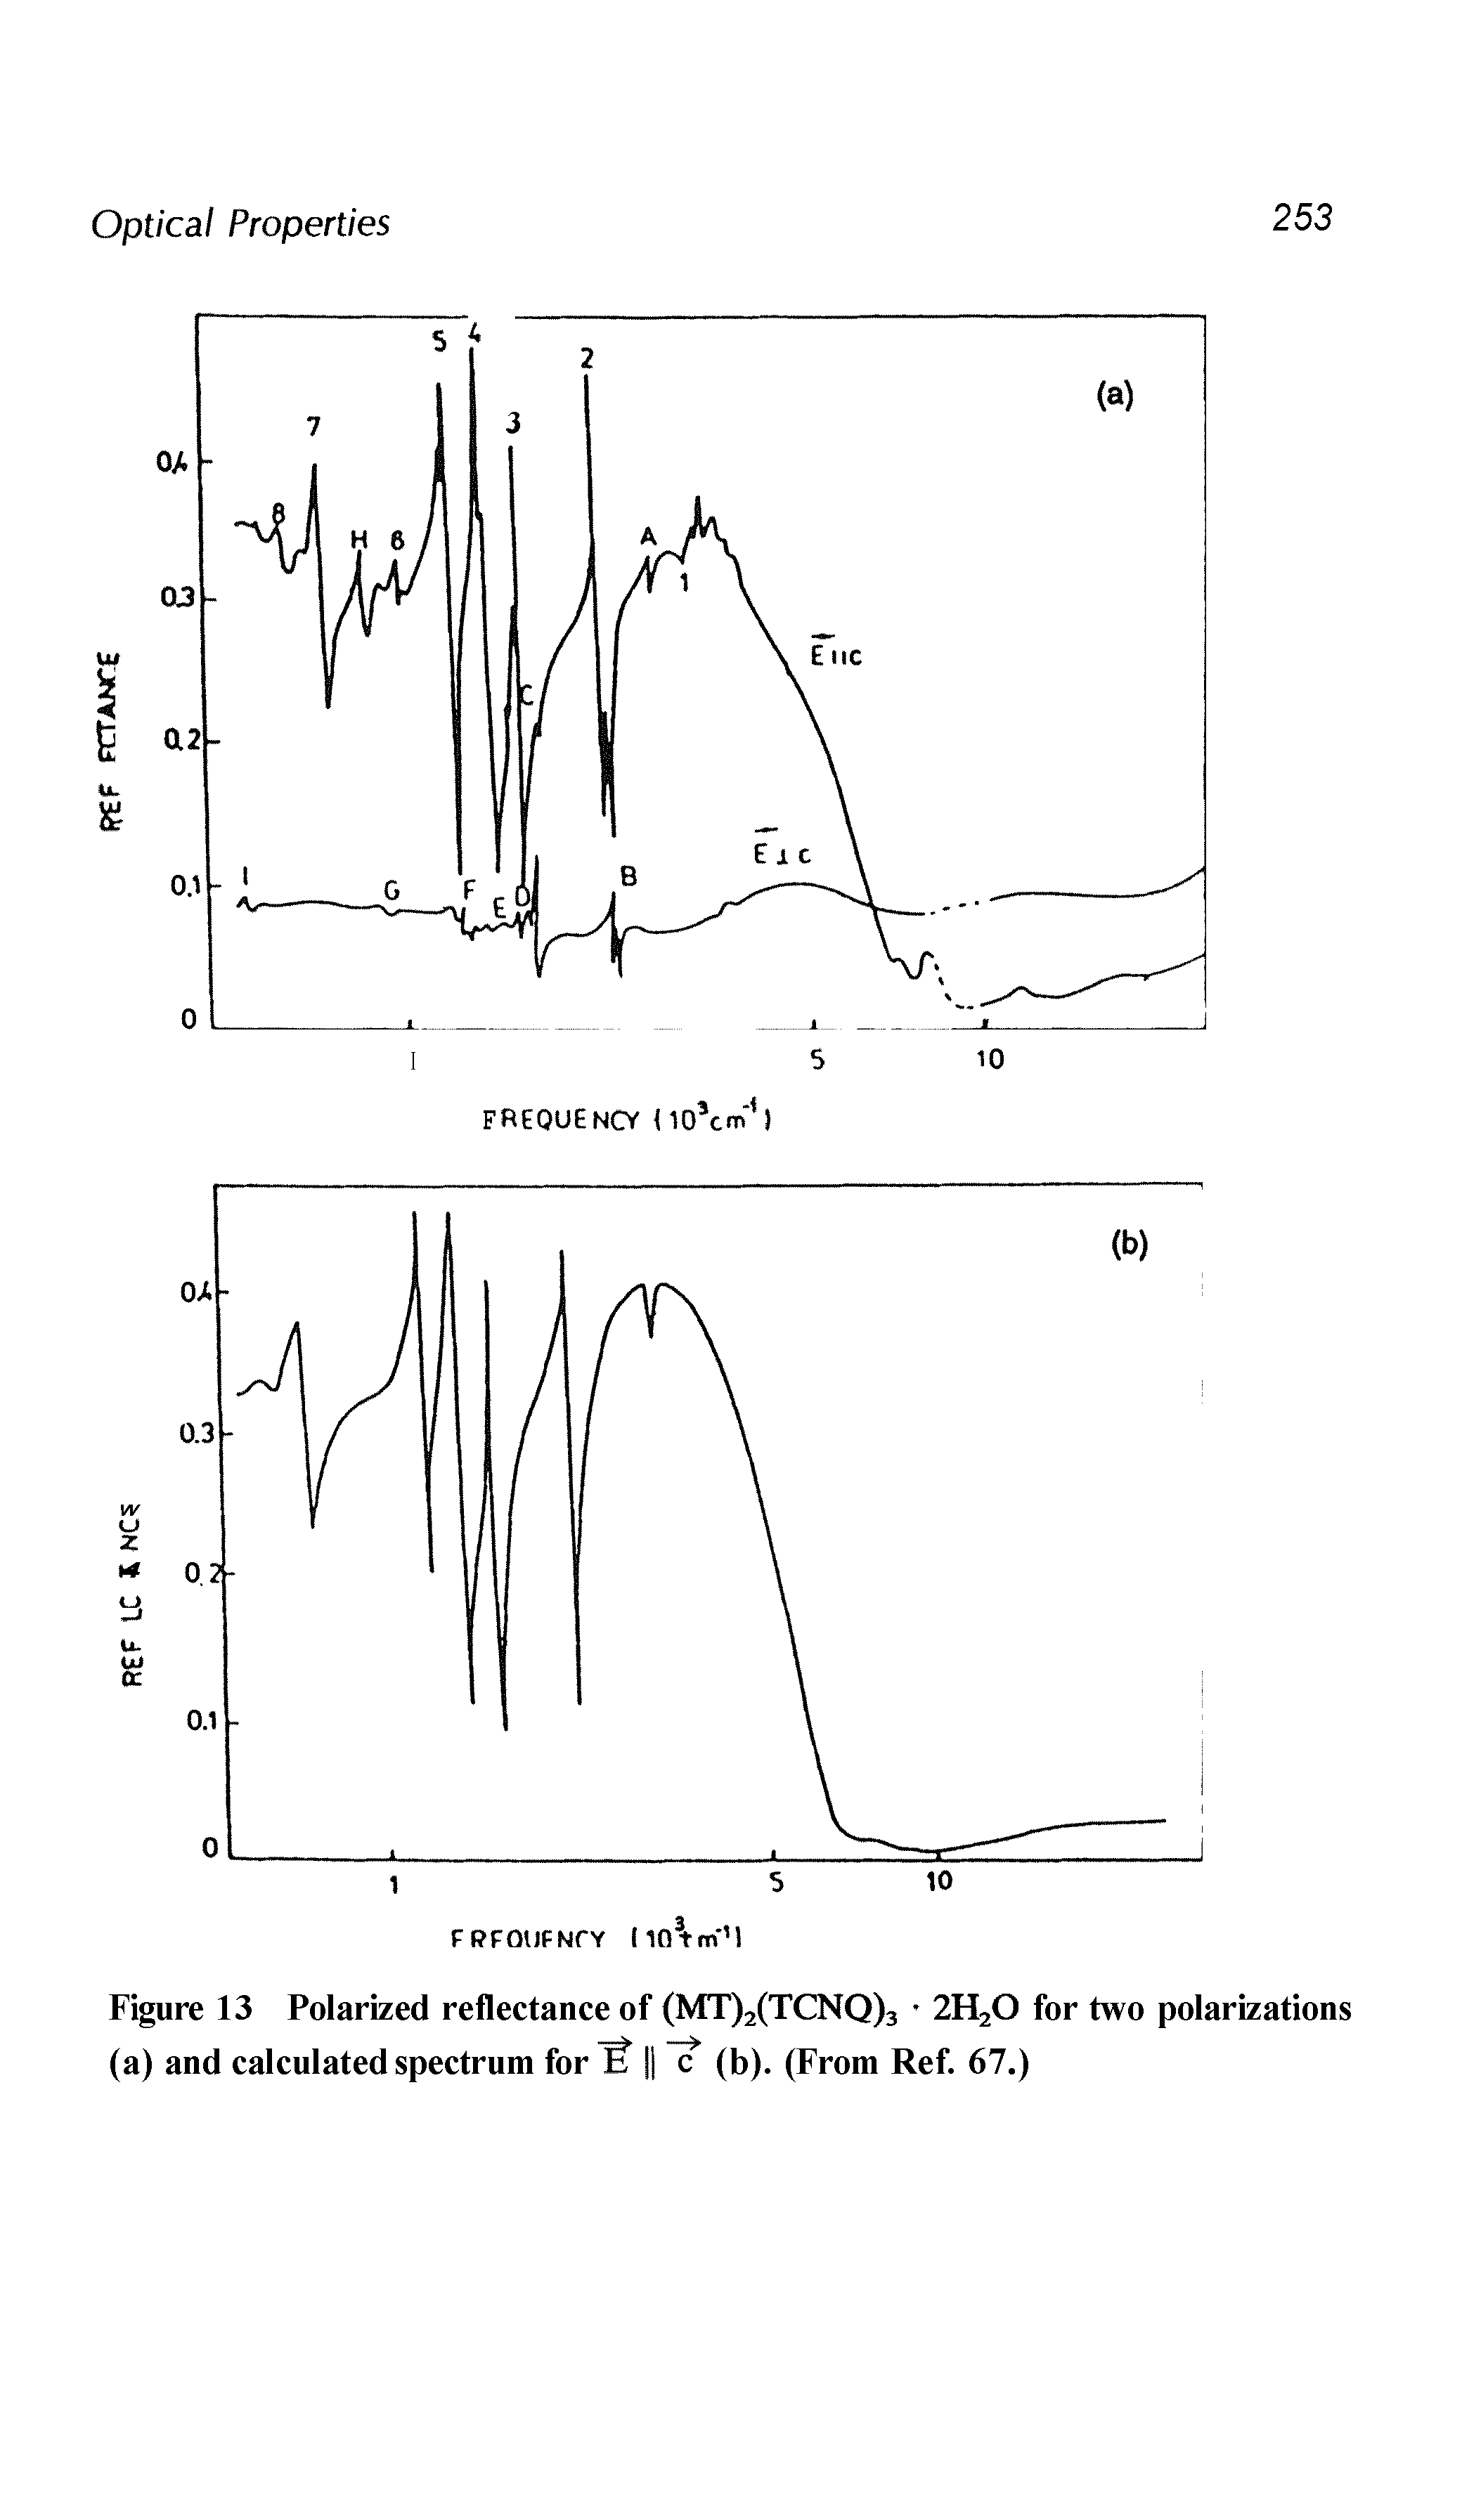 Figure 13 Polarized reflectance of (MT)2(TCNQ)3 2HzO for two polarizations (a) and calculated spectrum for if c (b). (From Ref. 67.)...